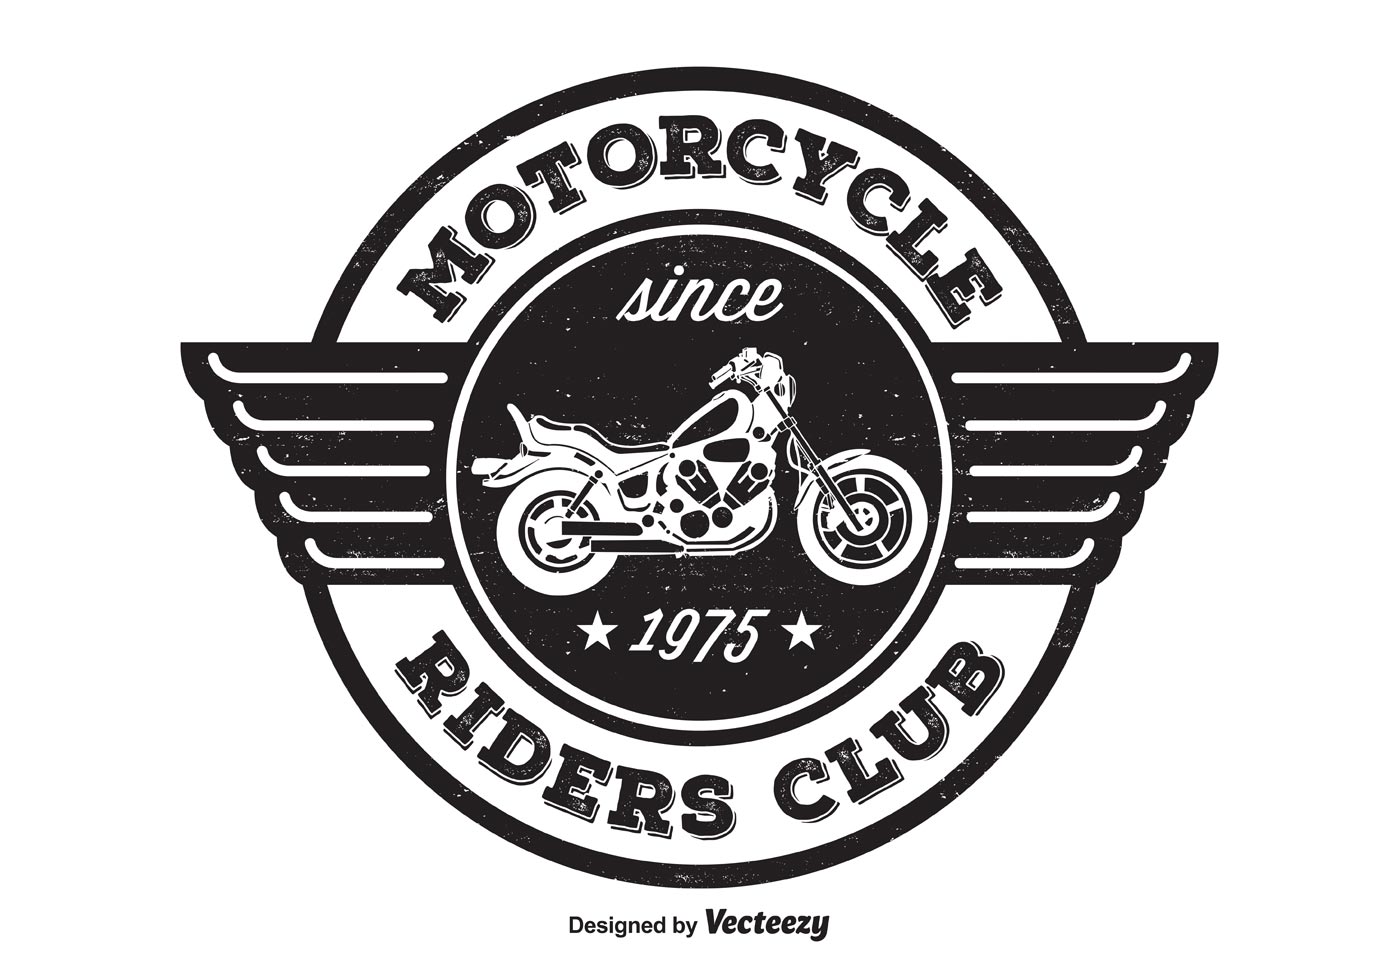 Download Motorcycle Riders T Shirt Design - Download Free Vector Art, Stock Graphics & Images